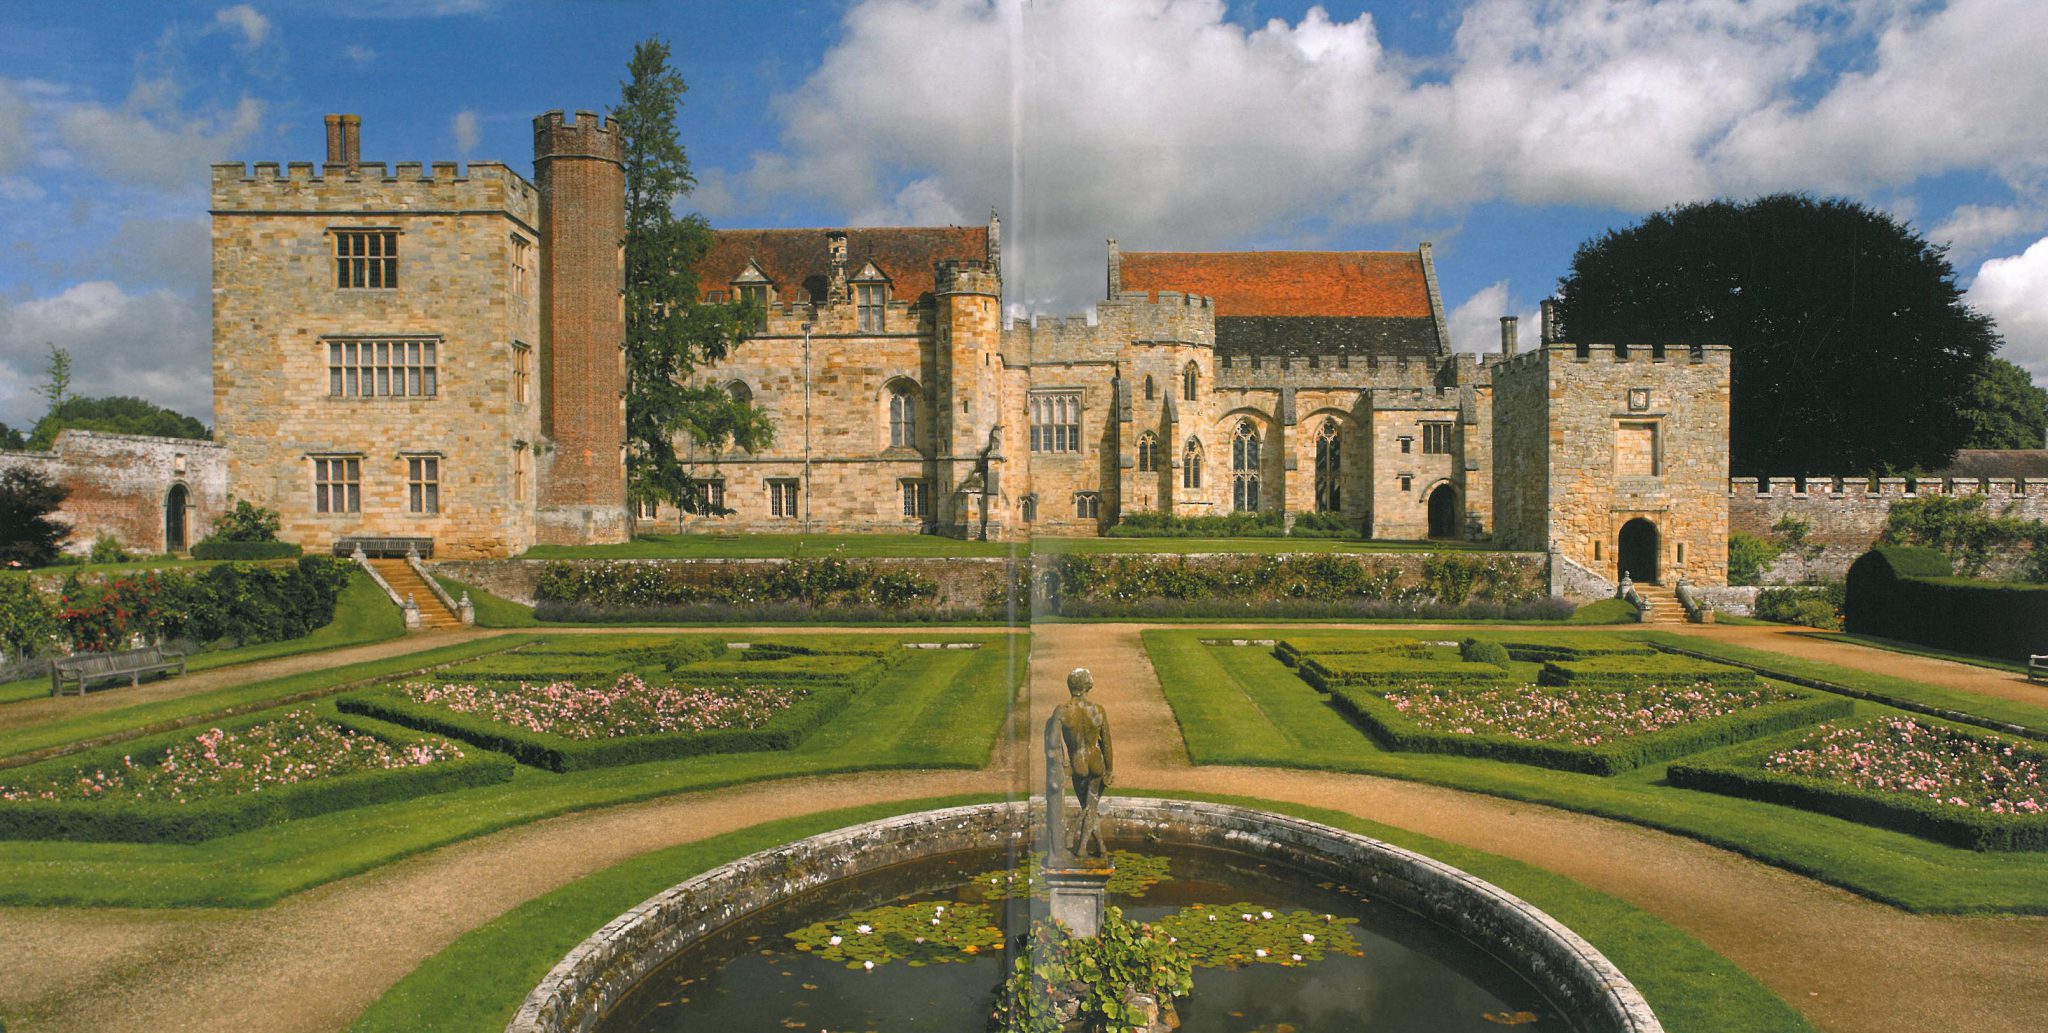 The full expanse of the south side of the Manor House, as seen from the Italian Garden. The Garden Tower is to the far right in this photo. Image courtesy of Penshurst Place.